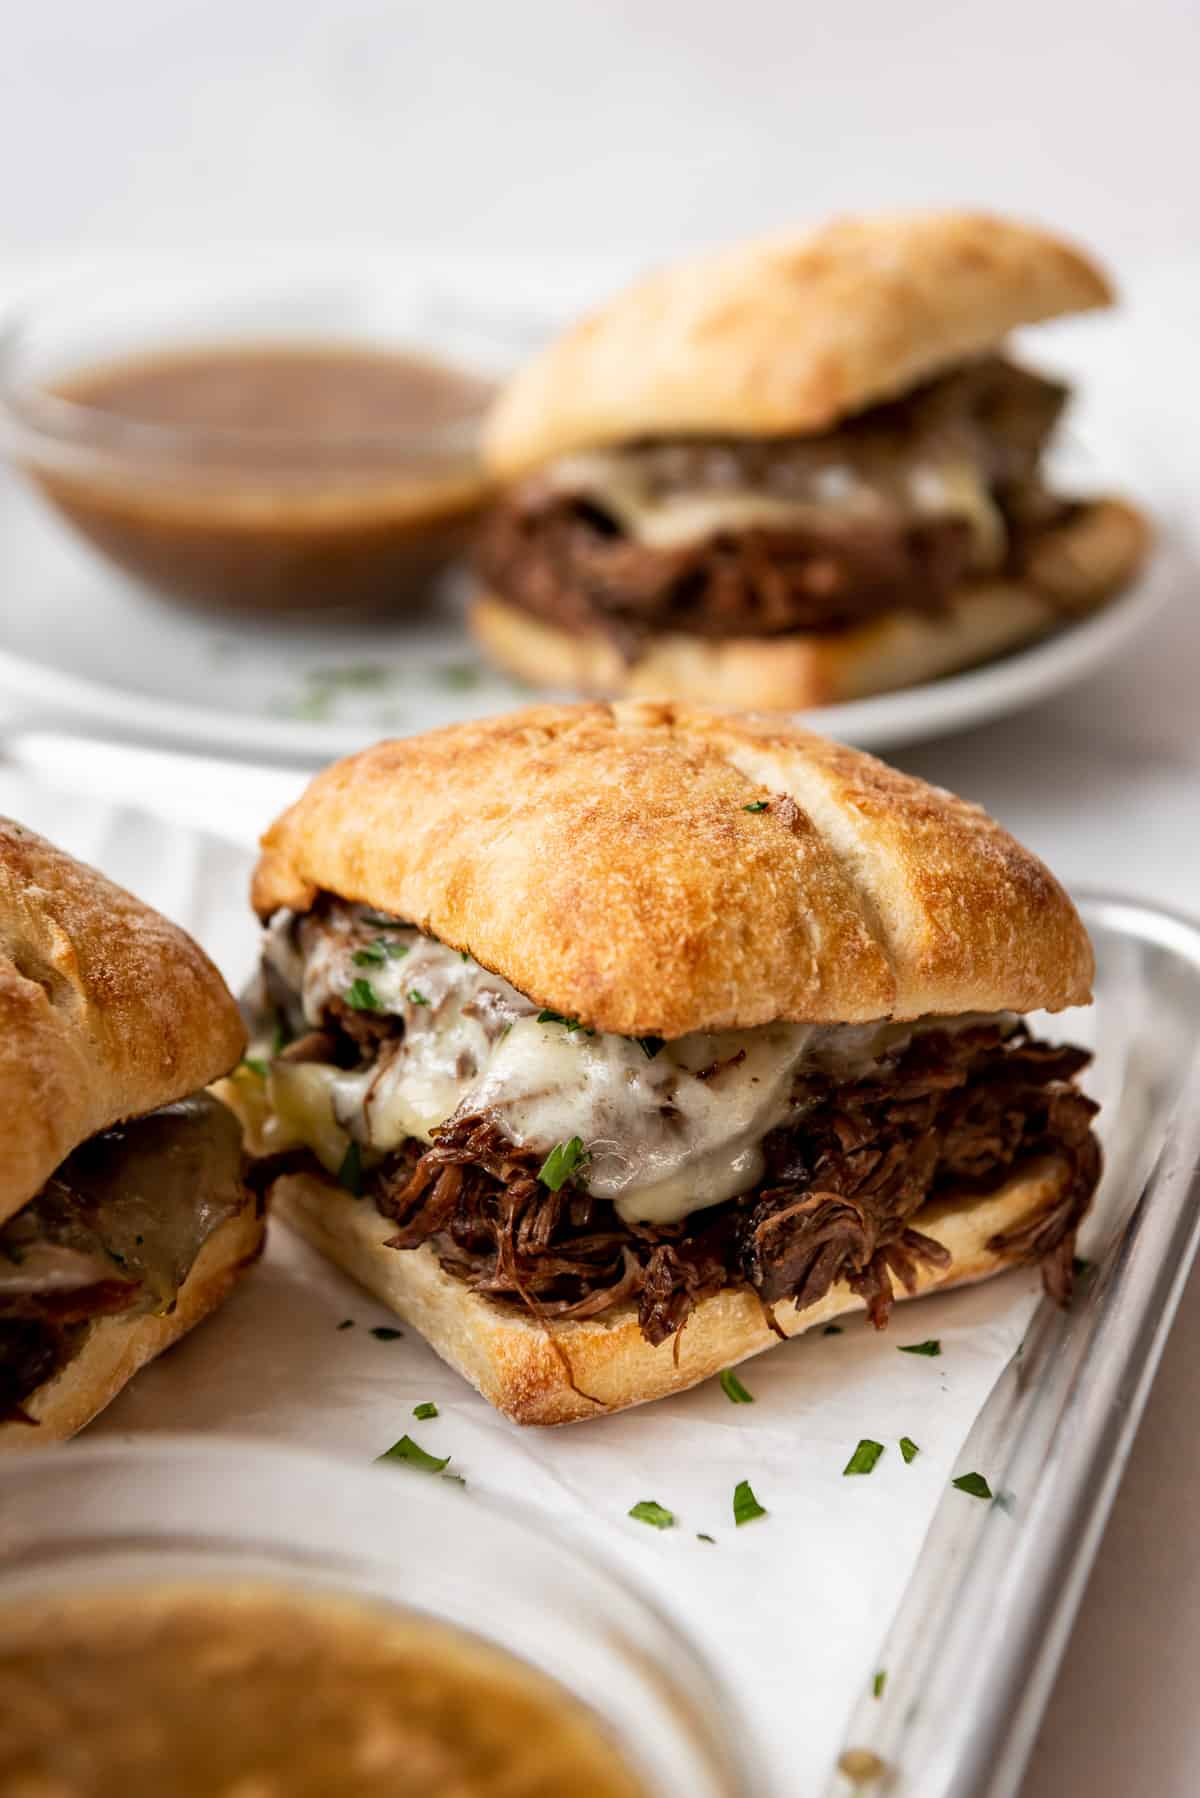 a shredded beef sandwich with melted cheese on a ciabatta bun.